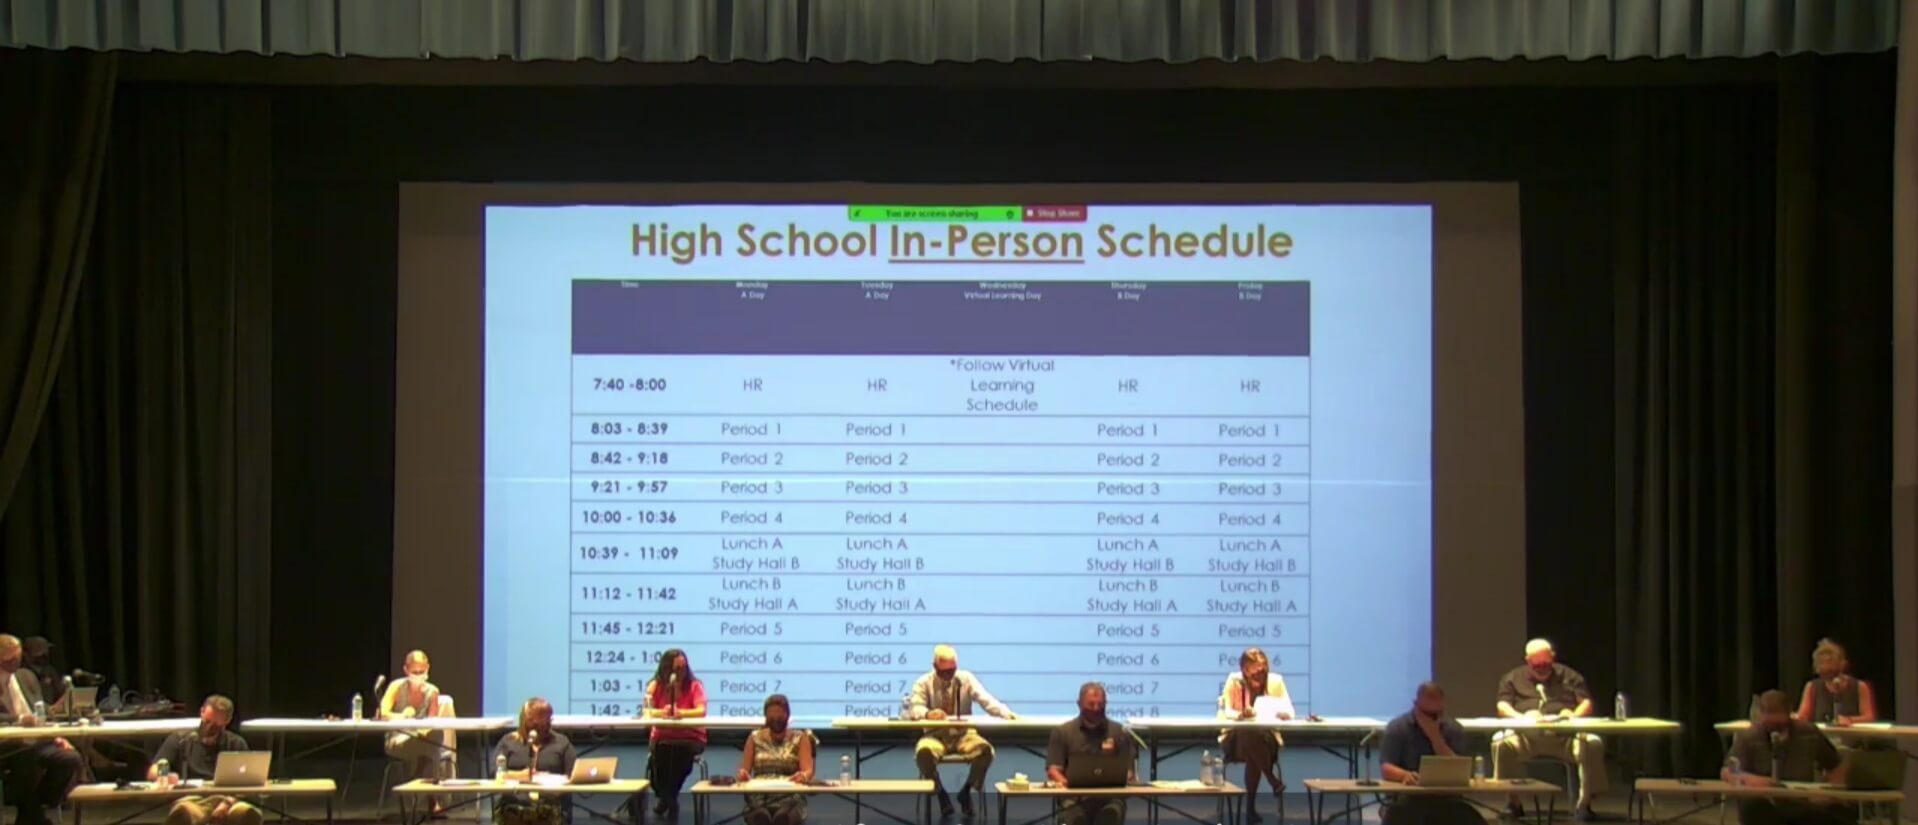 Middle Township School District staff presented their reopening plans via Zoom and in person Aug. 10. The district plans a hybrid model of in-classroom and online instruction. School reopens Sept. 8.